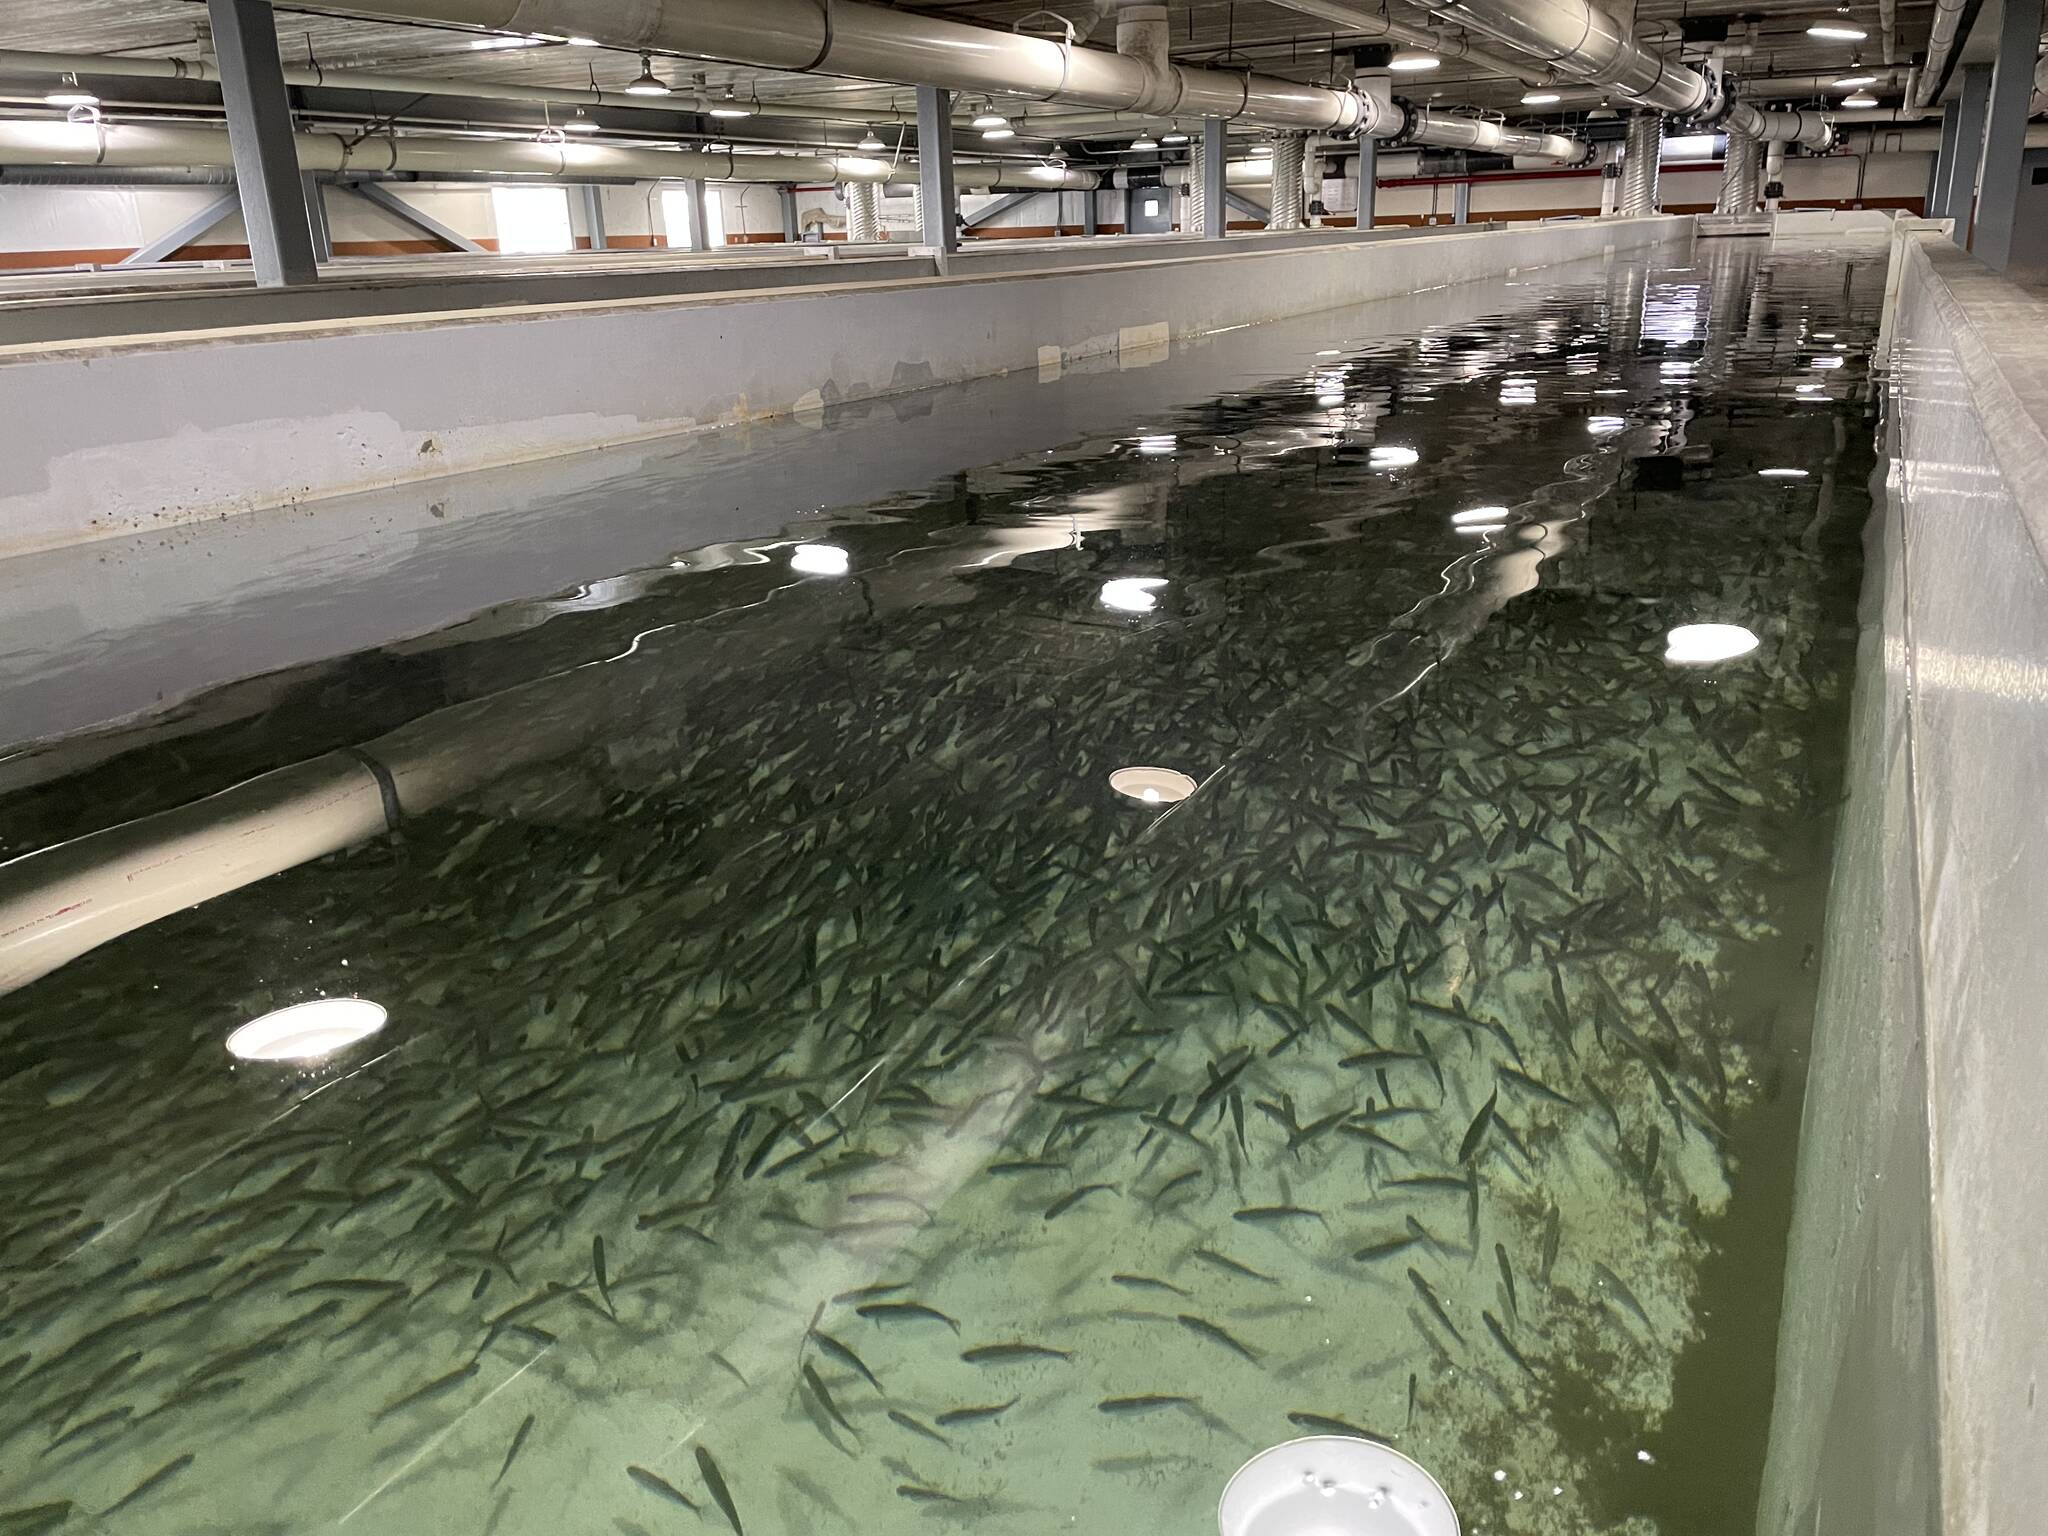 Michael S. Lockett / Juneau Empire 
Tens of thousands of juvenile salmon swirl about in a holding tank at Douglas Island Pink and Chum Inc. on April 22 as the hatchery prepares to reopen its doors to the public after more than two years of being closed.